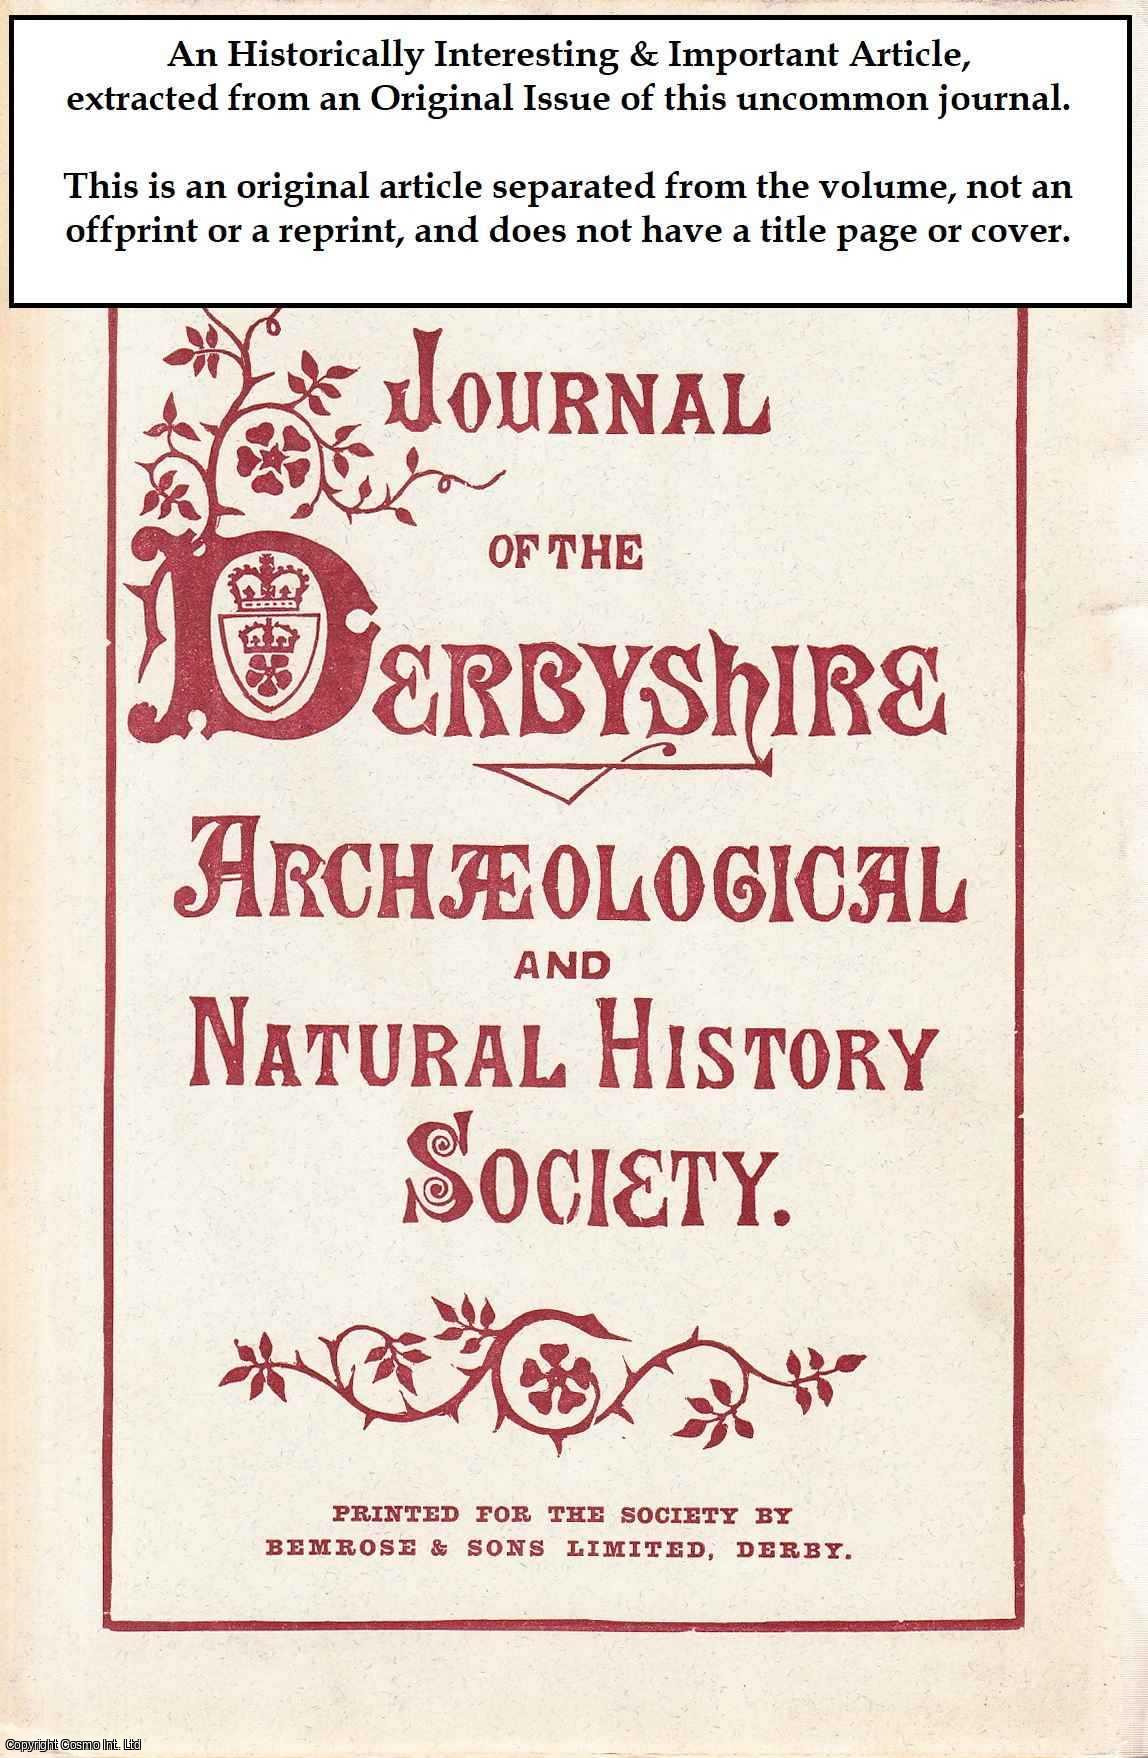 Francis C. R. Jourdain - The Hymenoptera Aculeata of Derbyshire. An original article from the Journal of the Derbyshire Archaeological & Natural History Society, 1904.